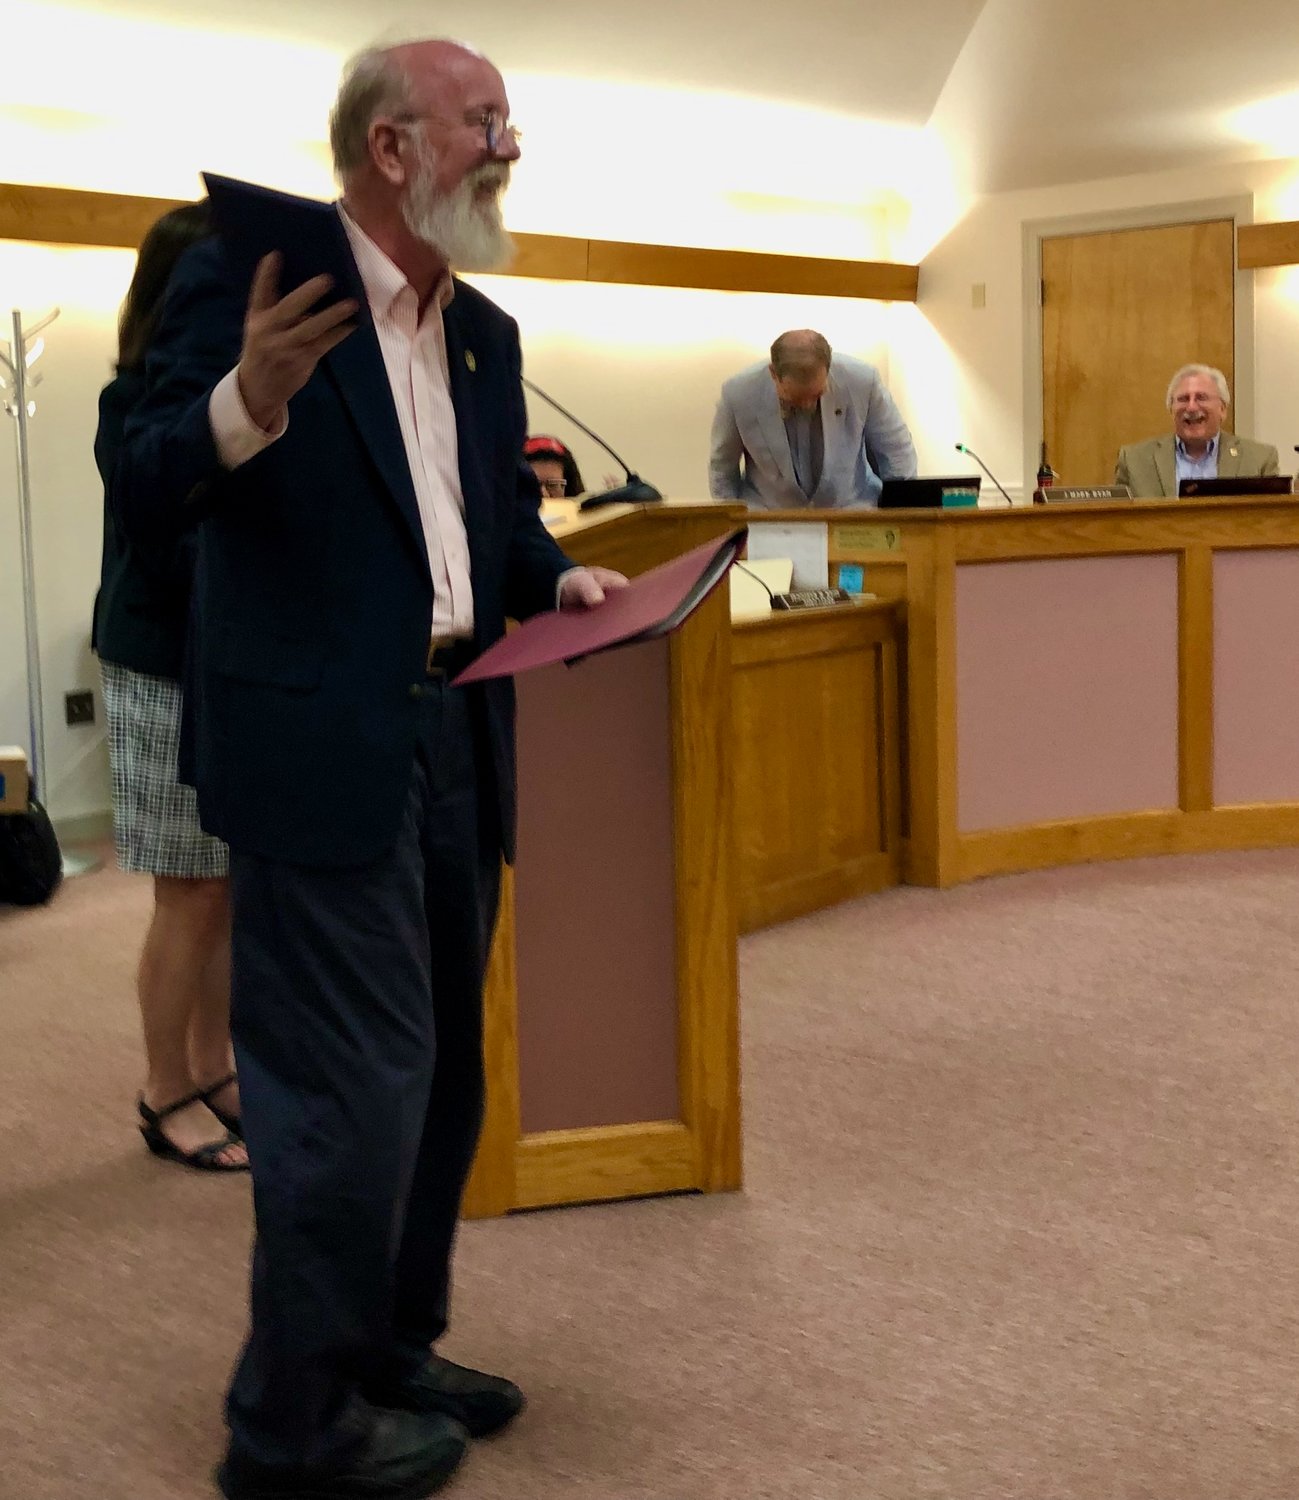 “I finally got a tile!” Crosby exclaimed after he was presented with a town tile and a proclamation in his honor during a Town Council meeting on Monday, June 27.